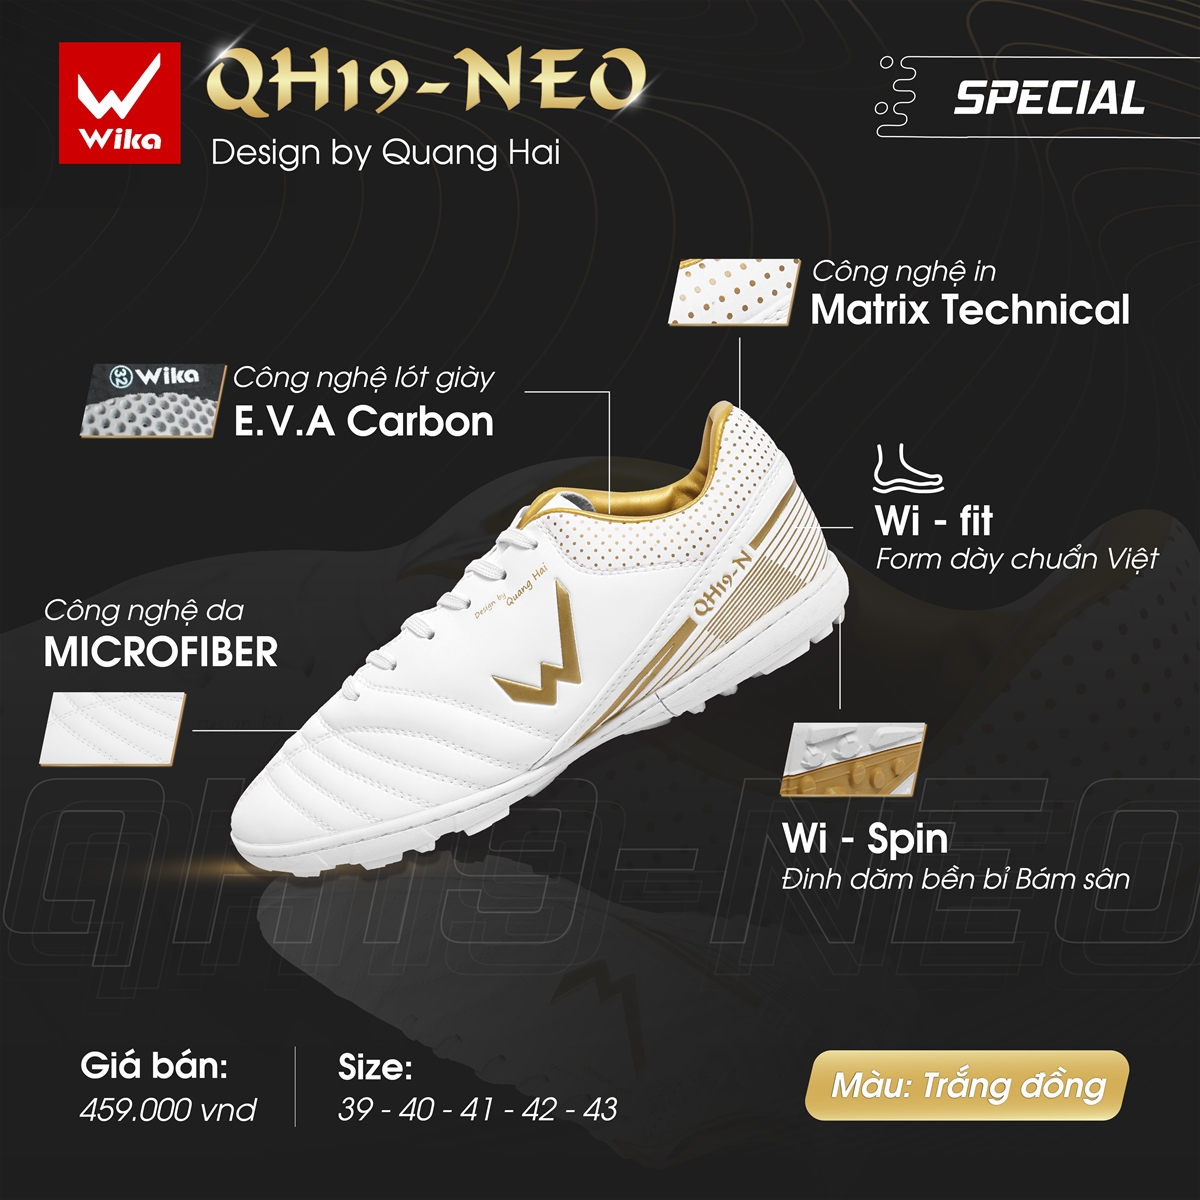 qh19neo special